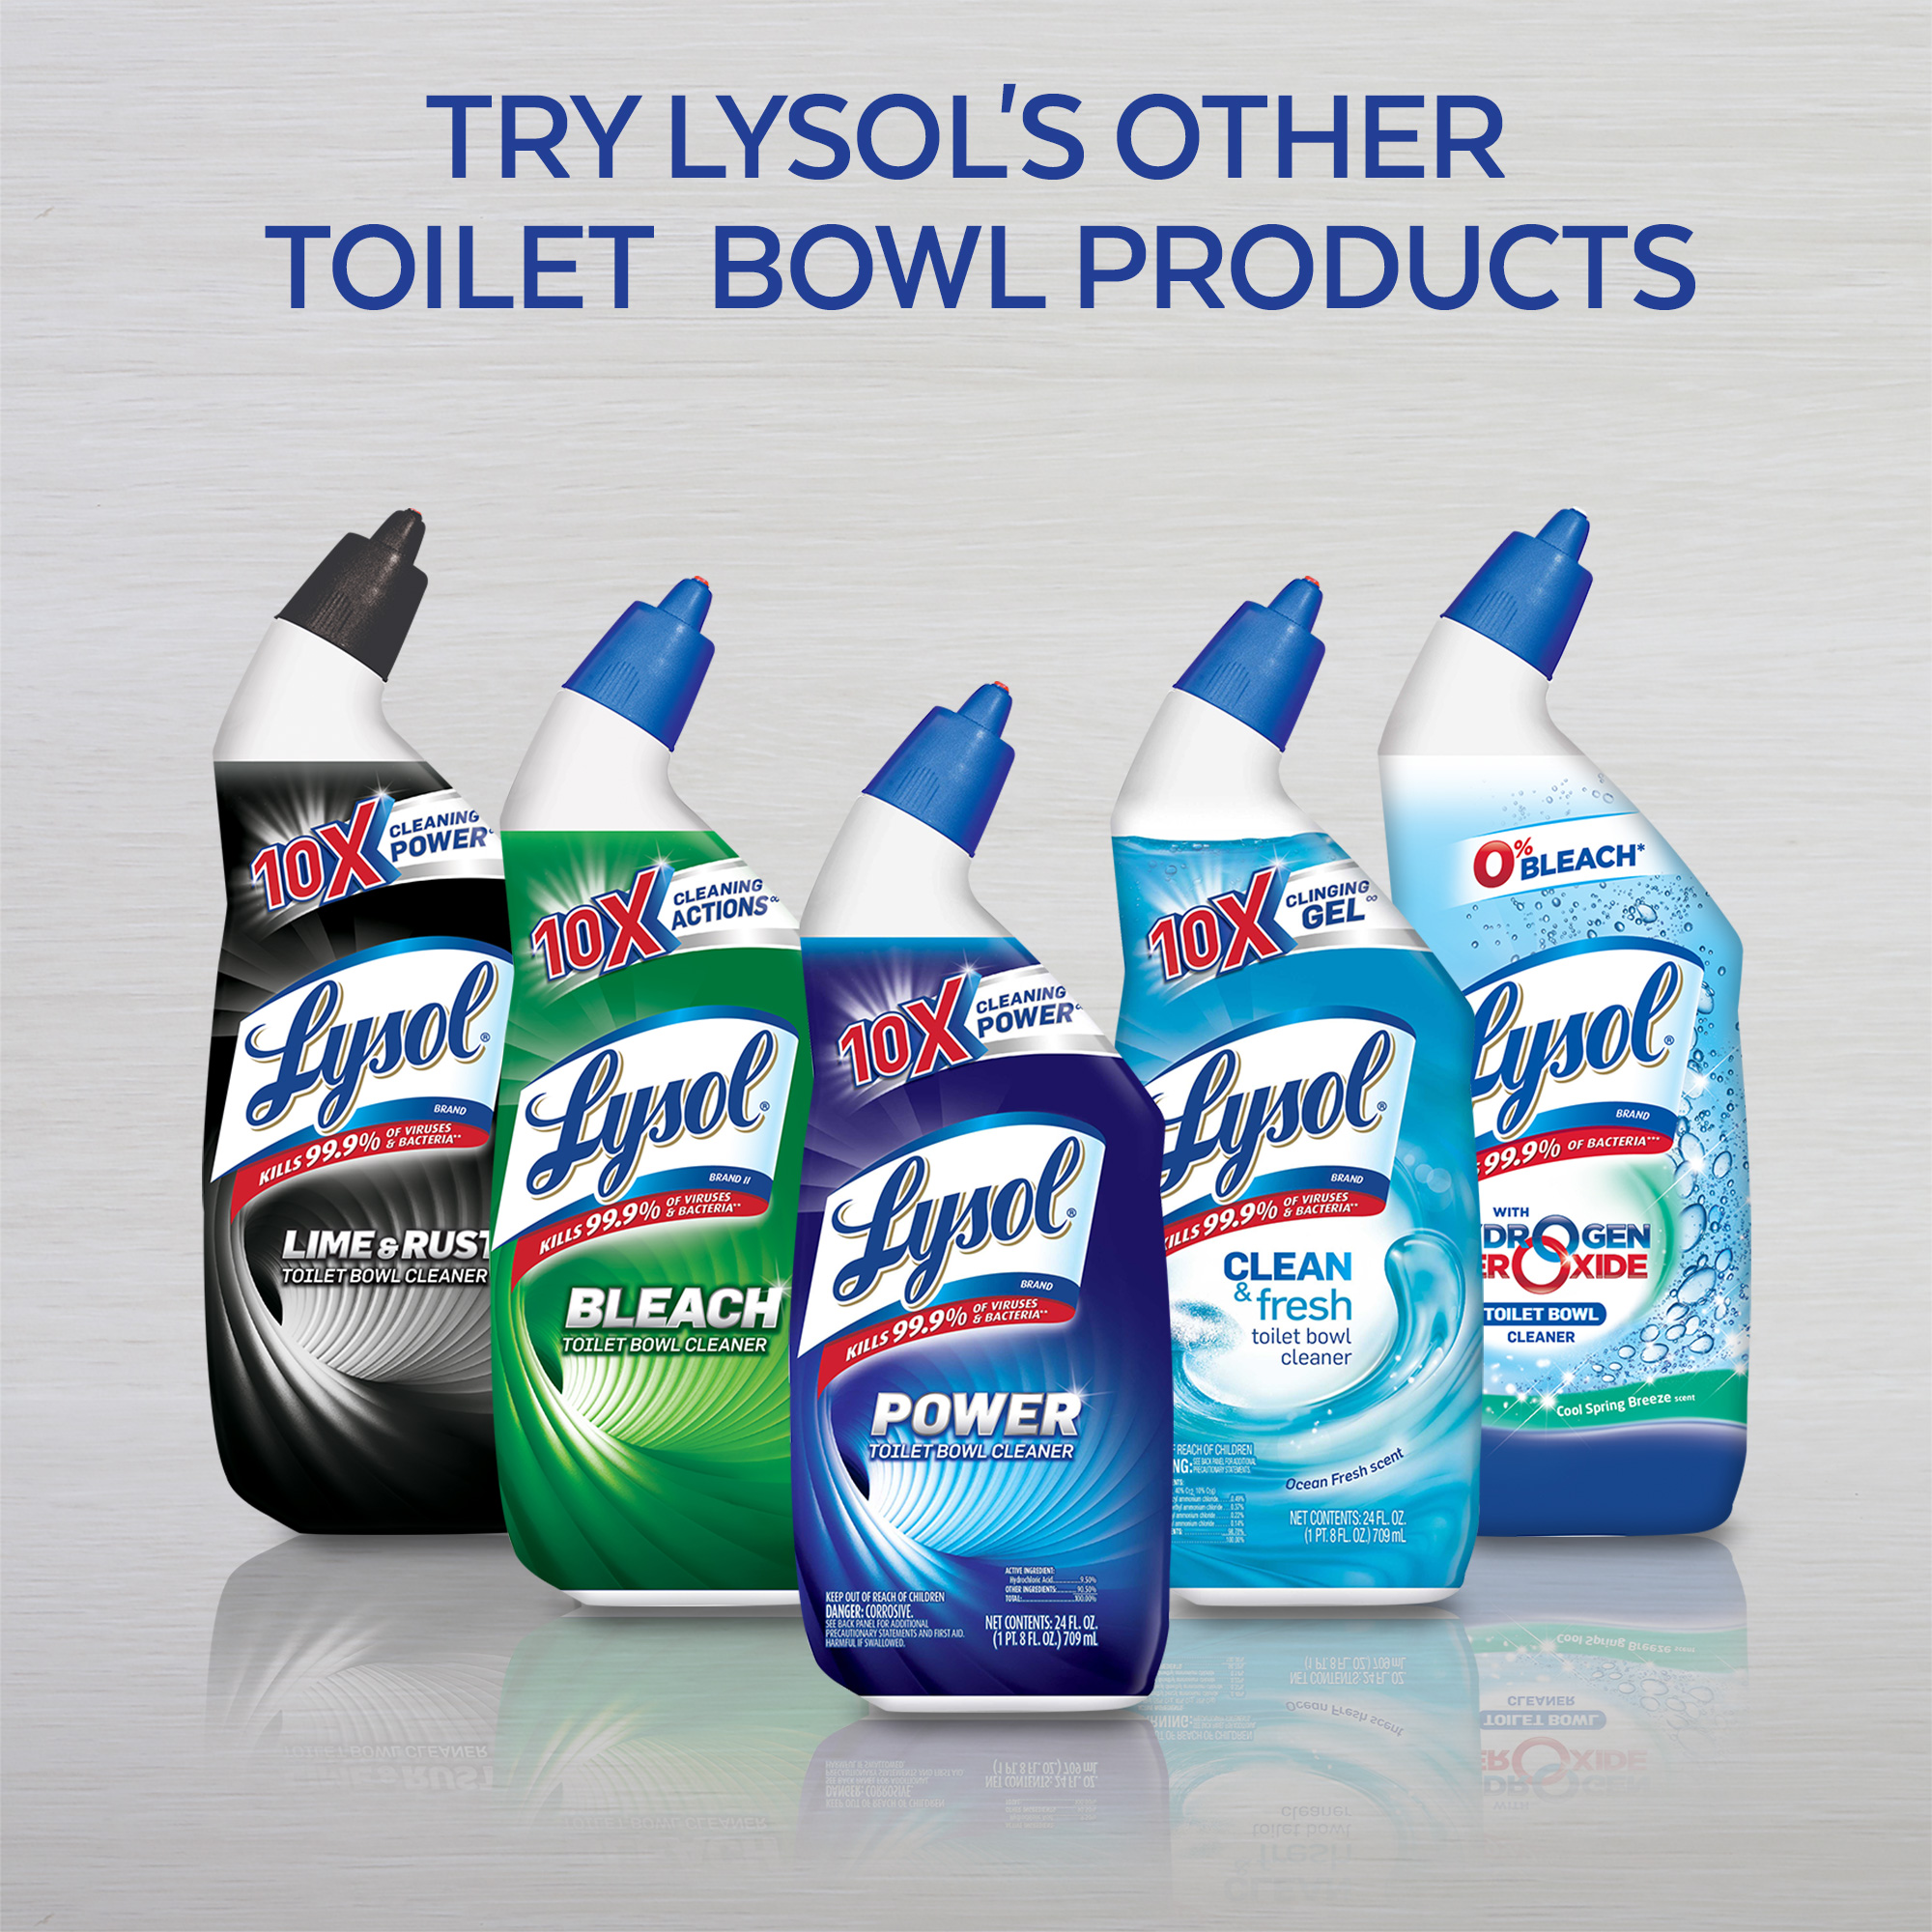 Lysol Power Toilet Bowl Cleaner Gel, For Cleaning and Disinfecting, Stain Removal, 24oz (Pack of 2) - image 2 of 6